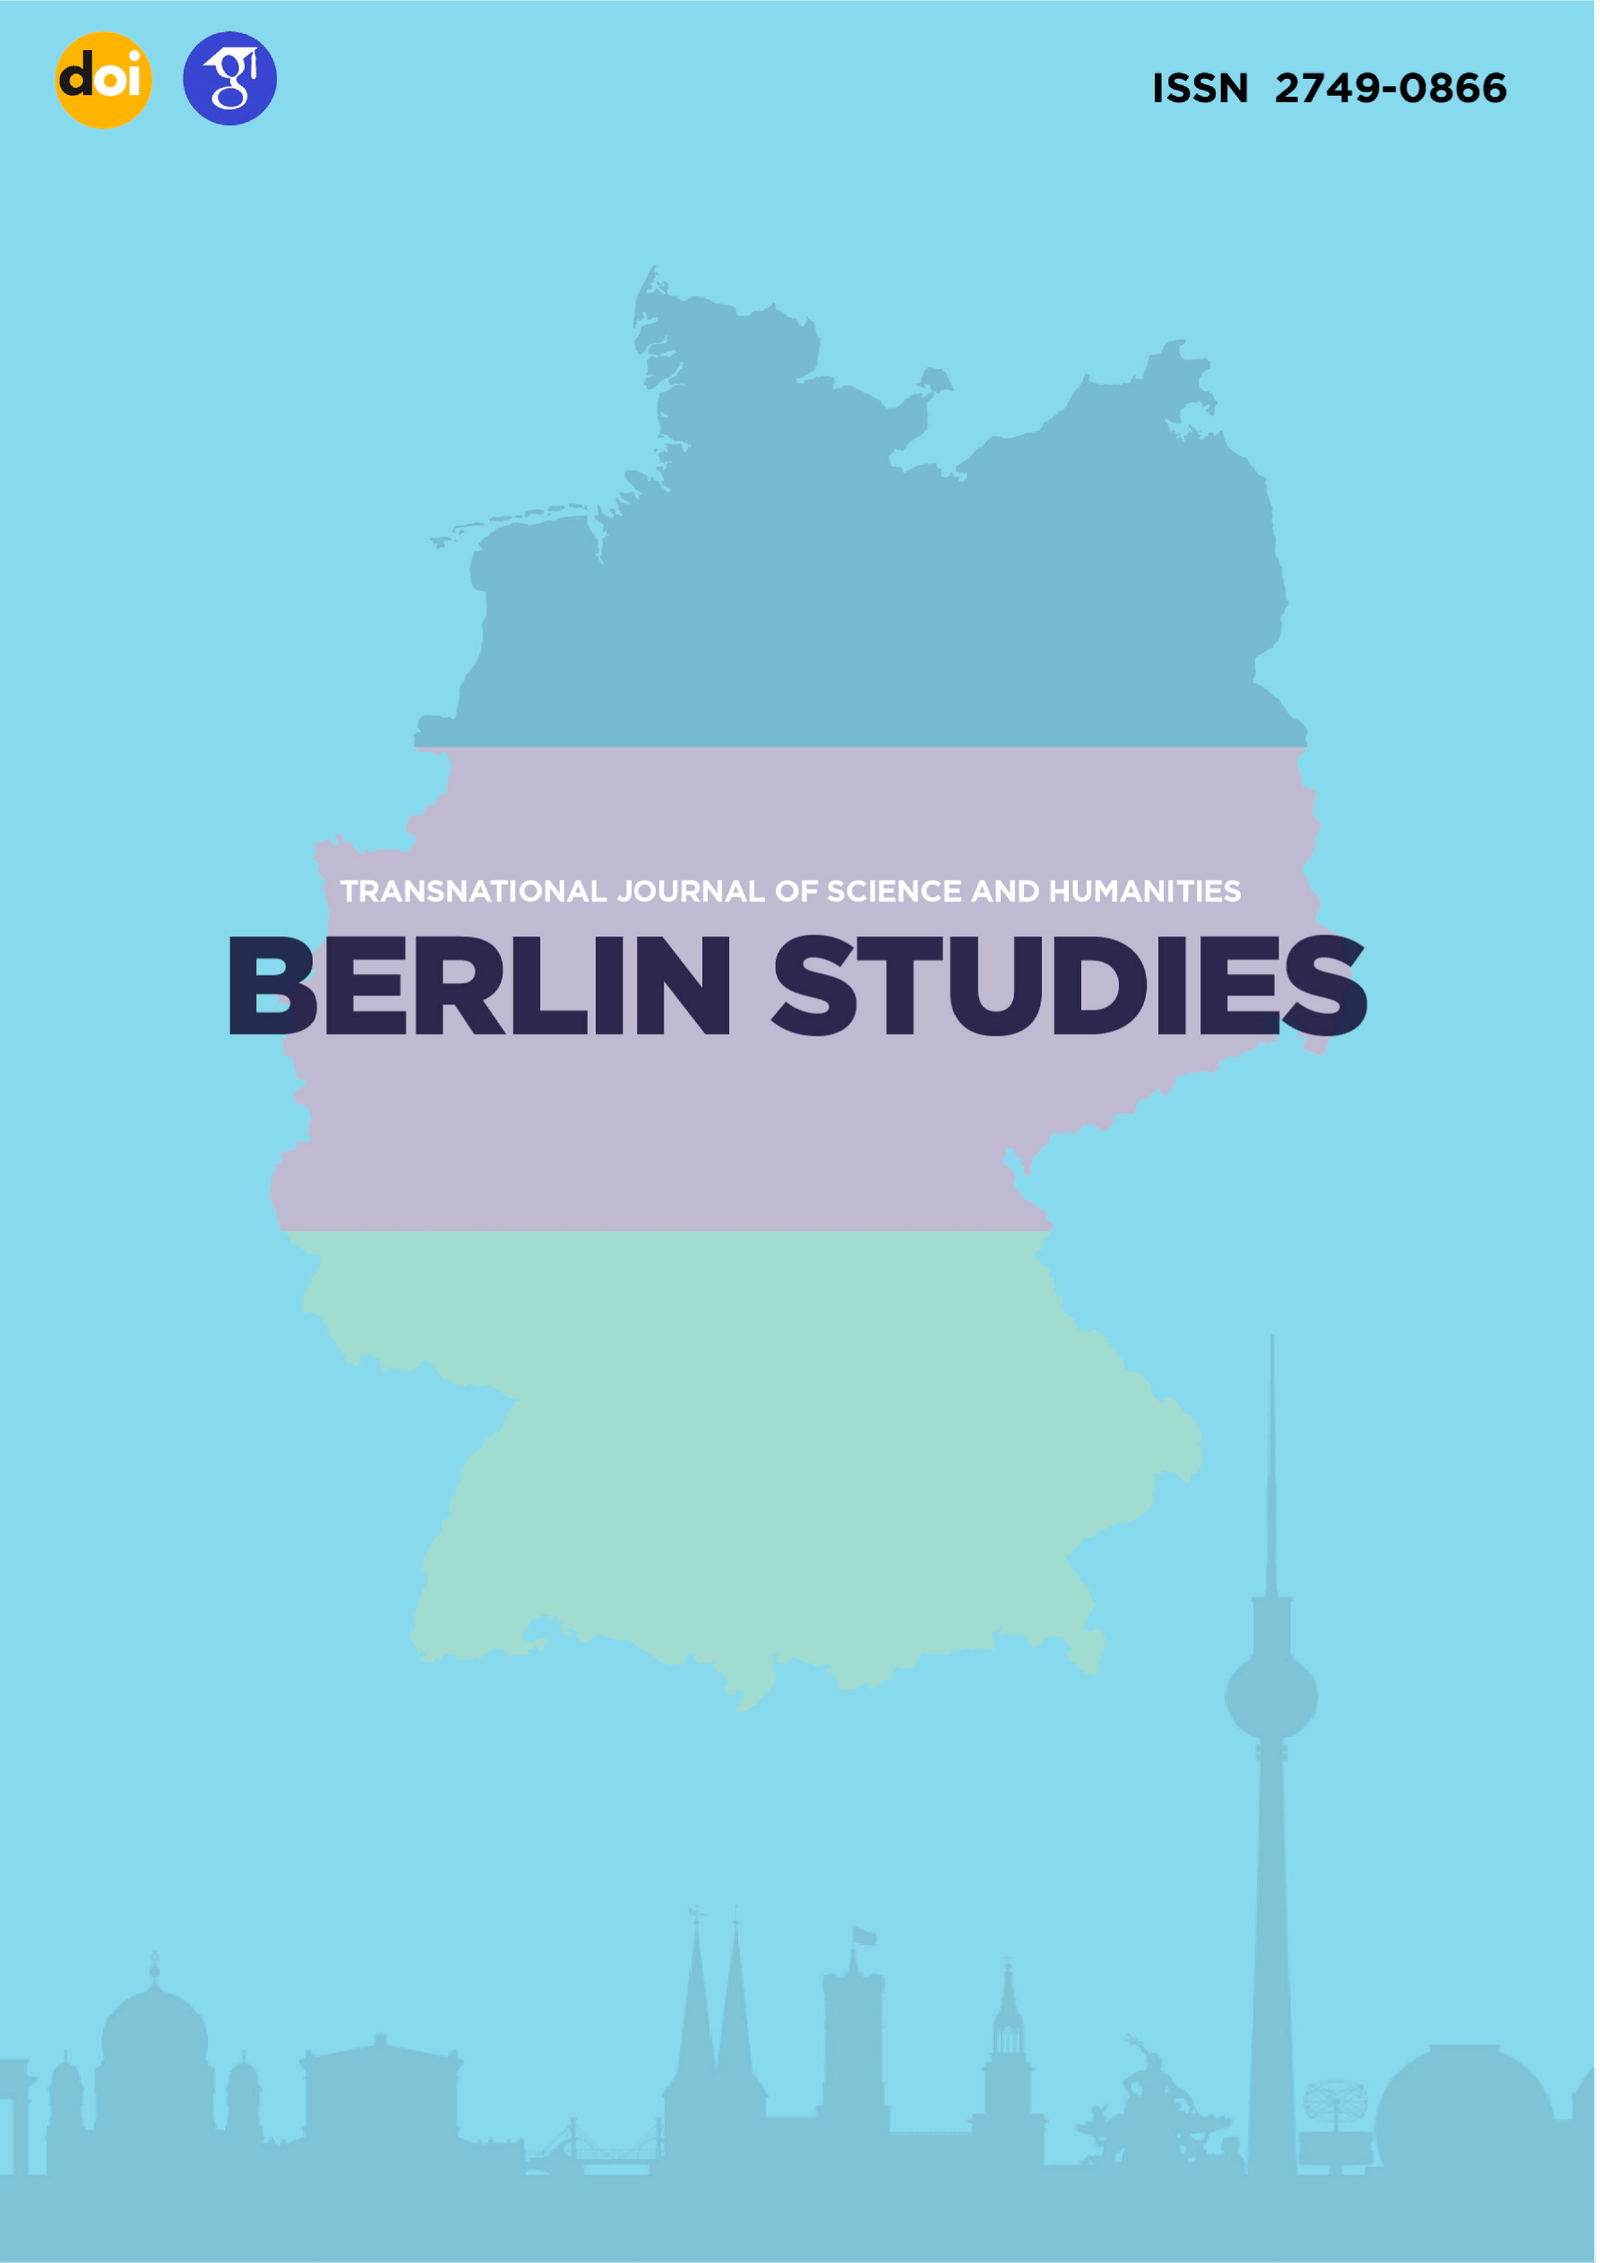 					View Vol. 2 No. 1.1 Economical sciences (2022): Berlin Studies Transnational Journal of Science and Humanities
				